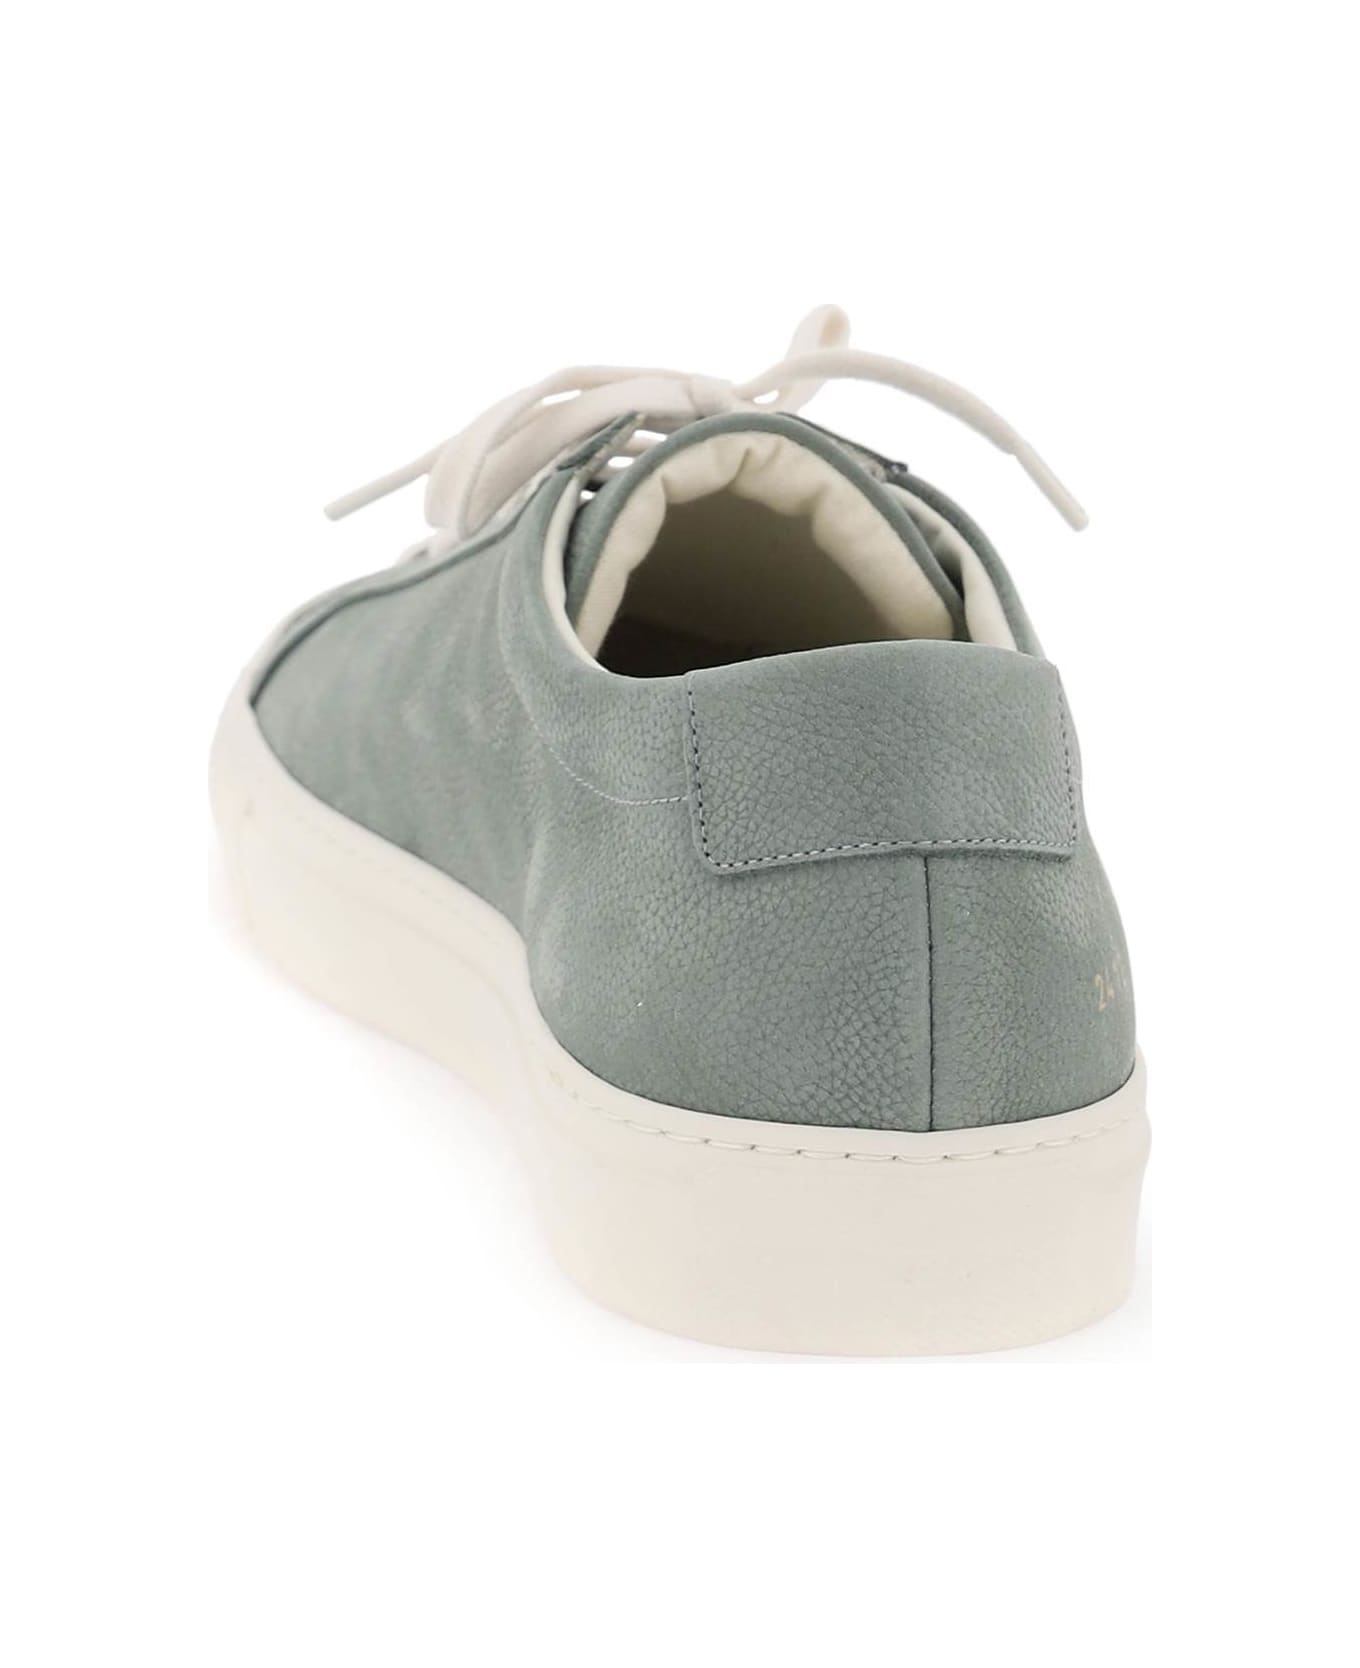 Common Projects Original Achilles Leather Sneakers - SAGE (Green)